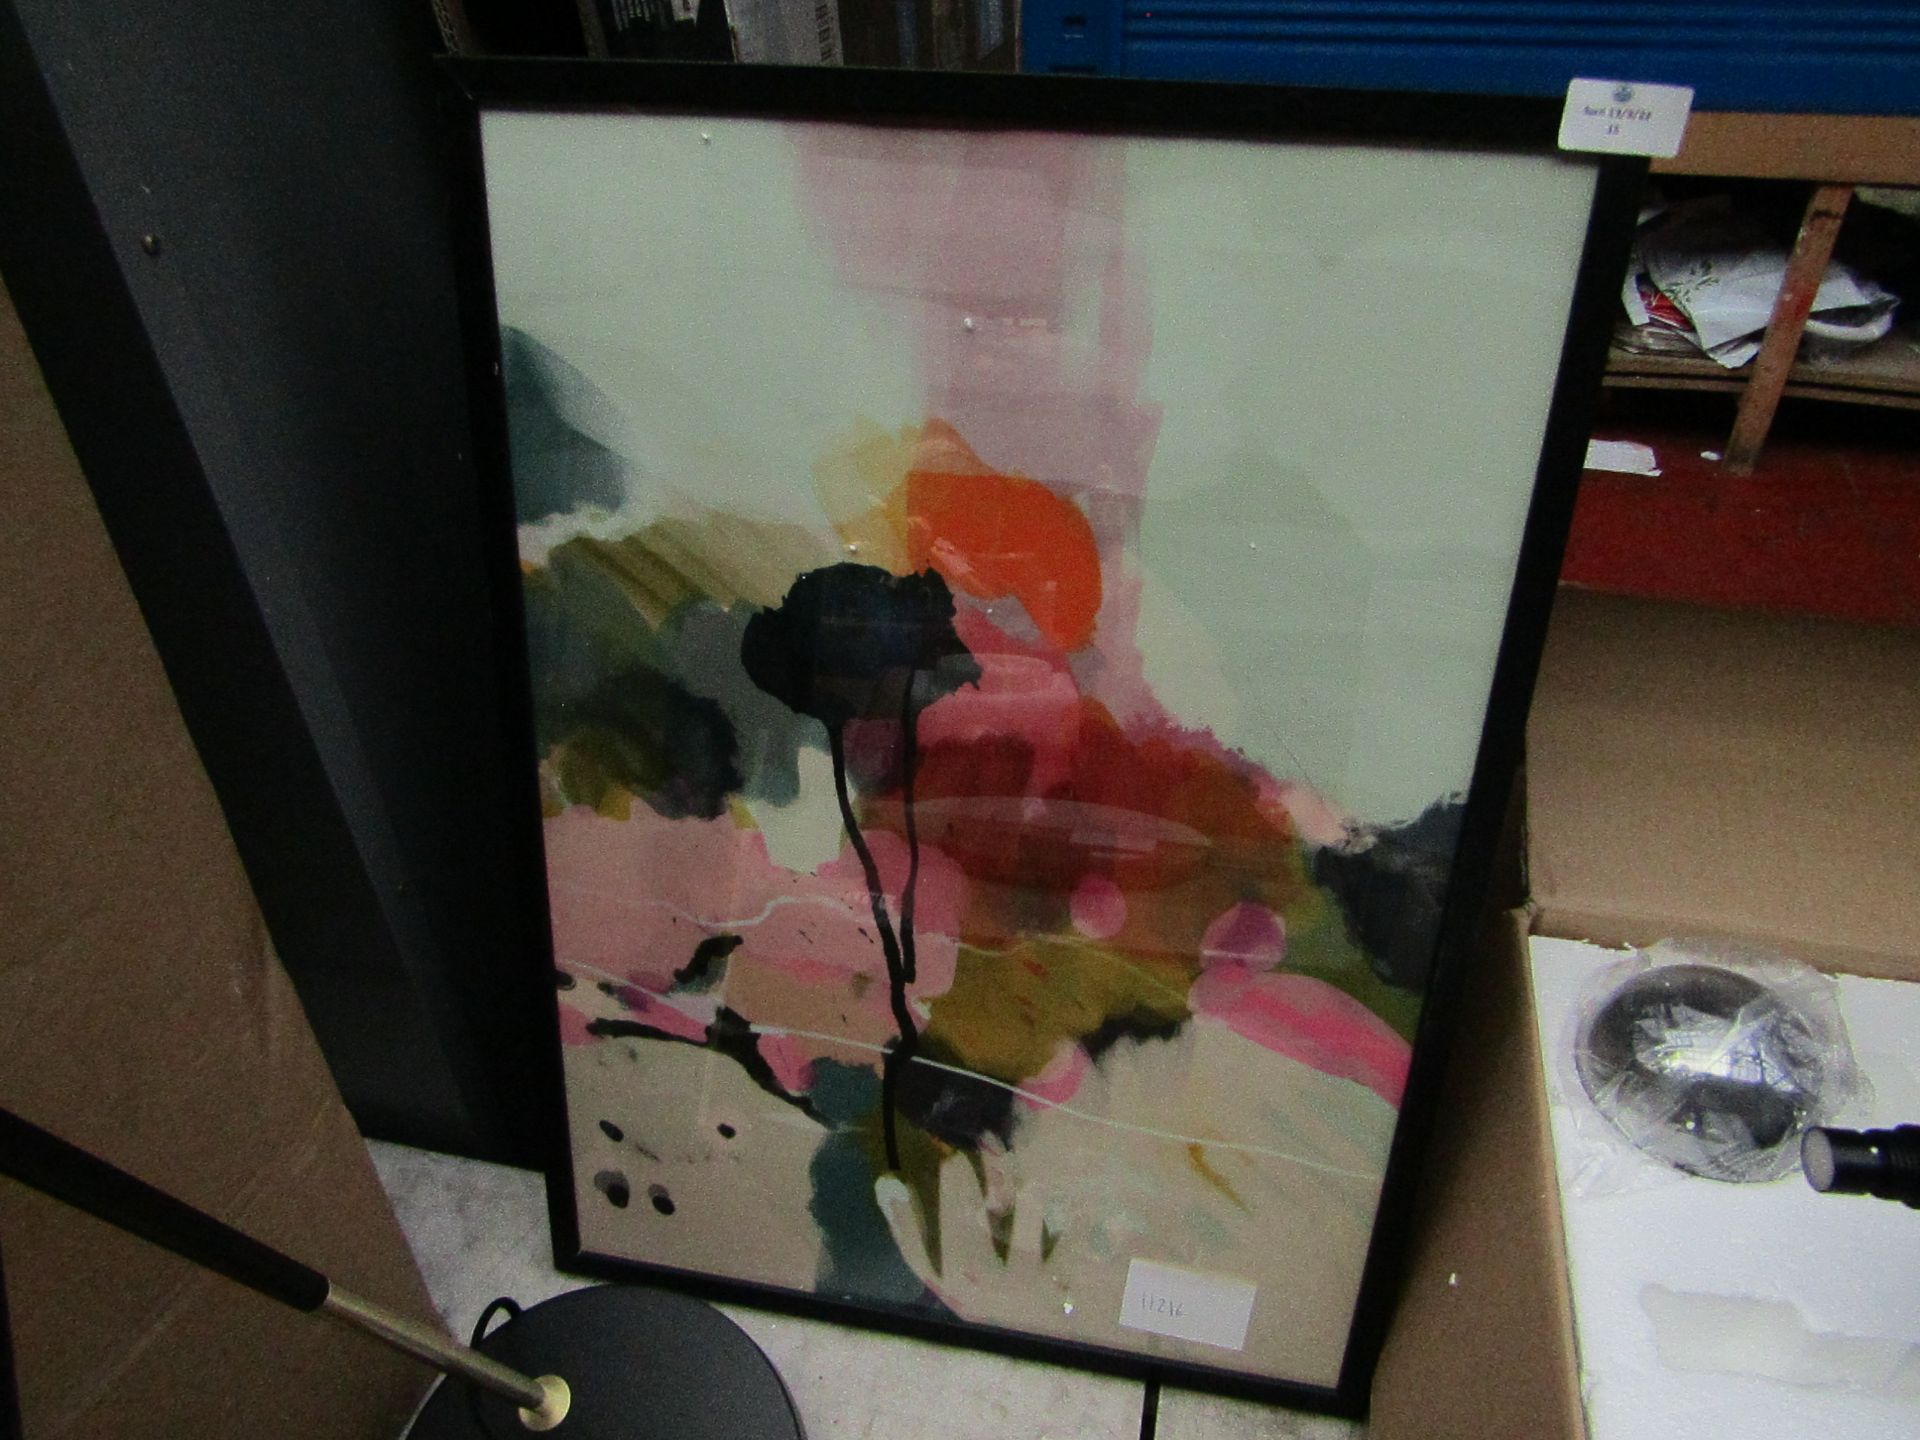 1 x Made.com Abstract Landscape Floral Print Framed Wall Art Print A3 Multi RRP £49 SKU MAD-